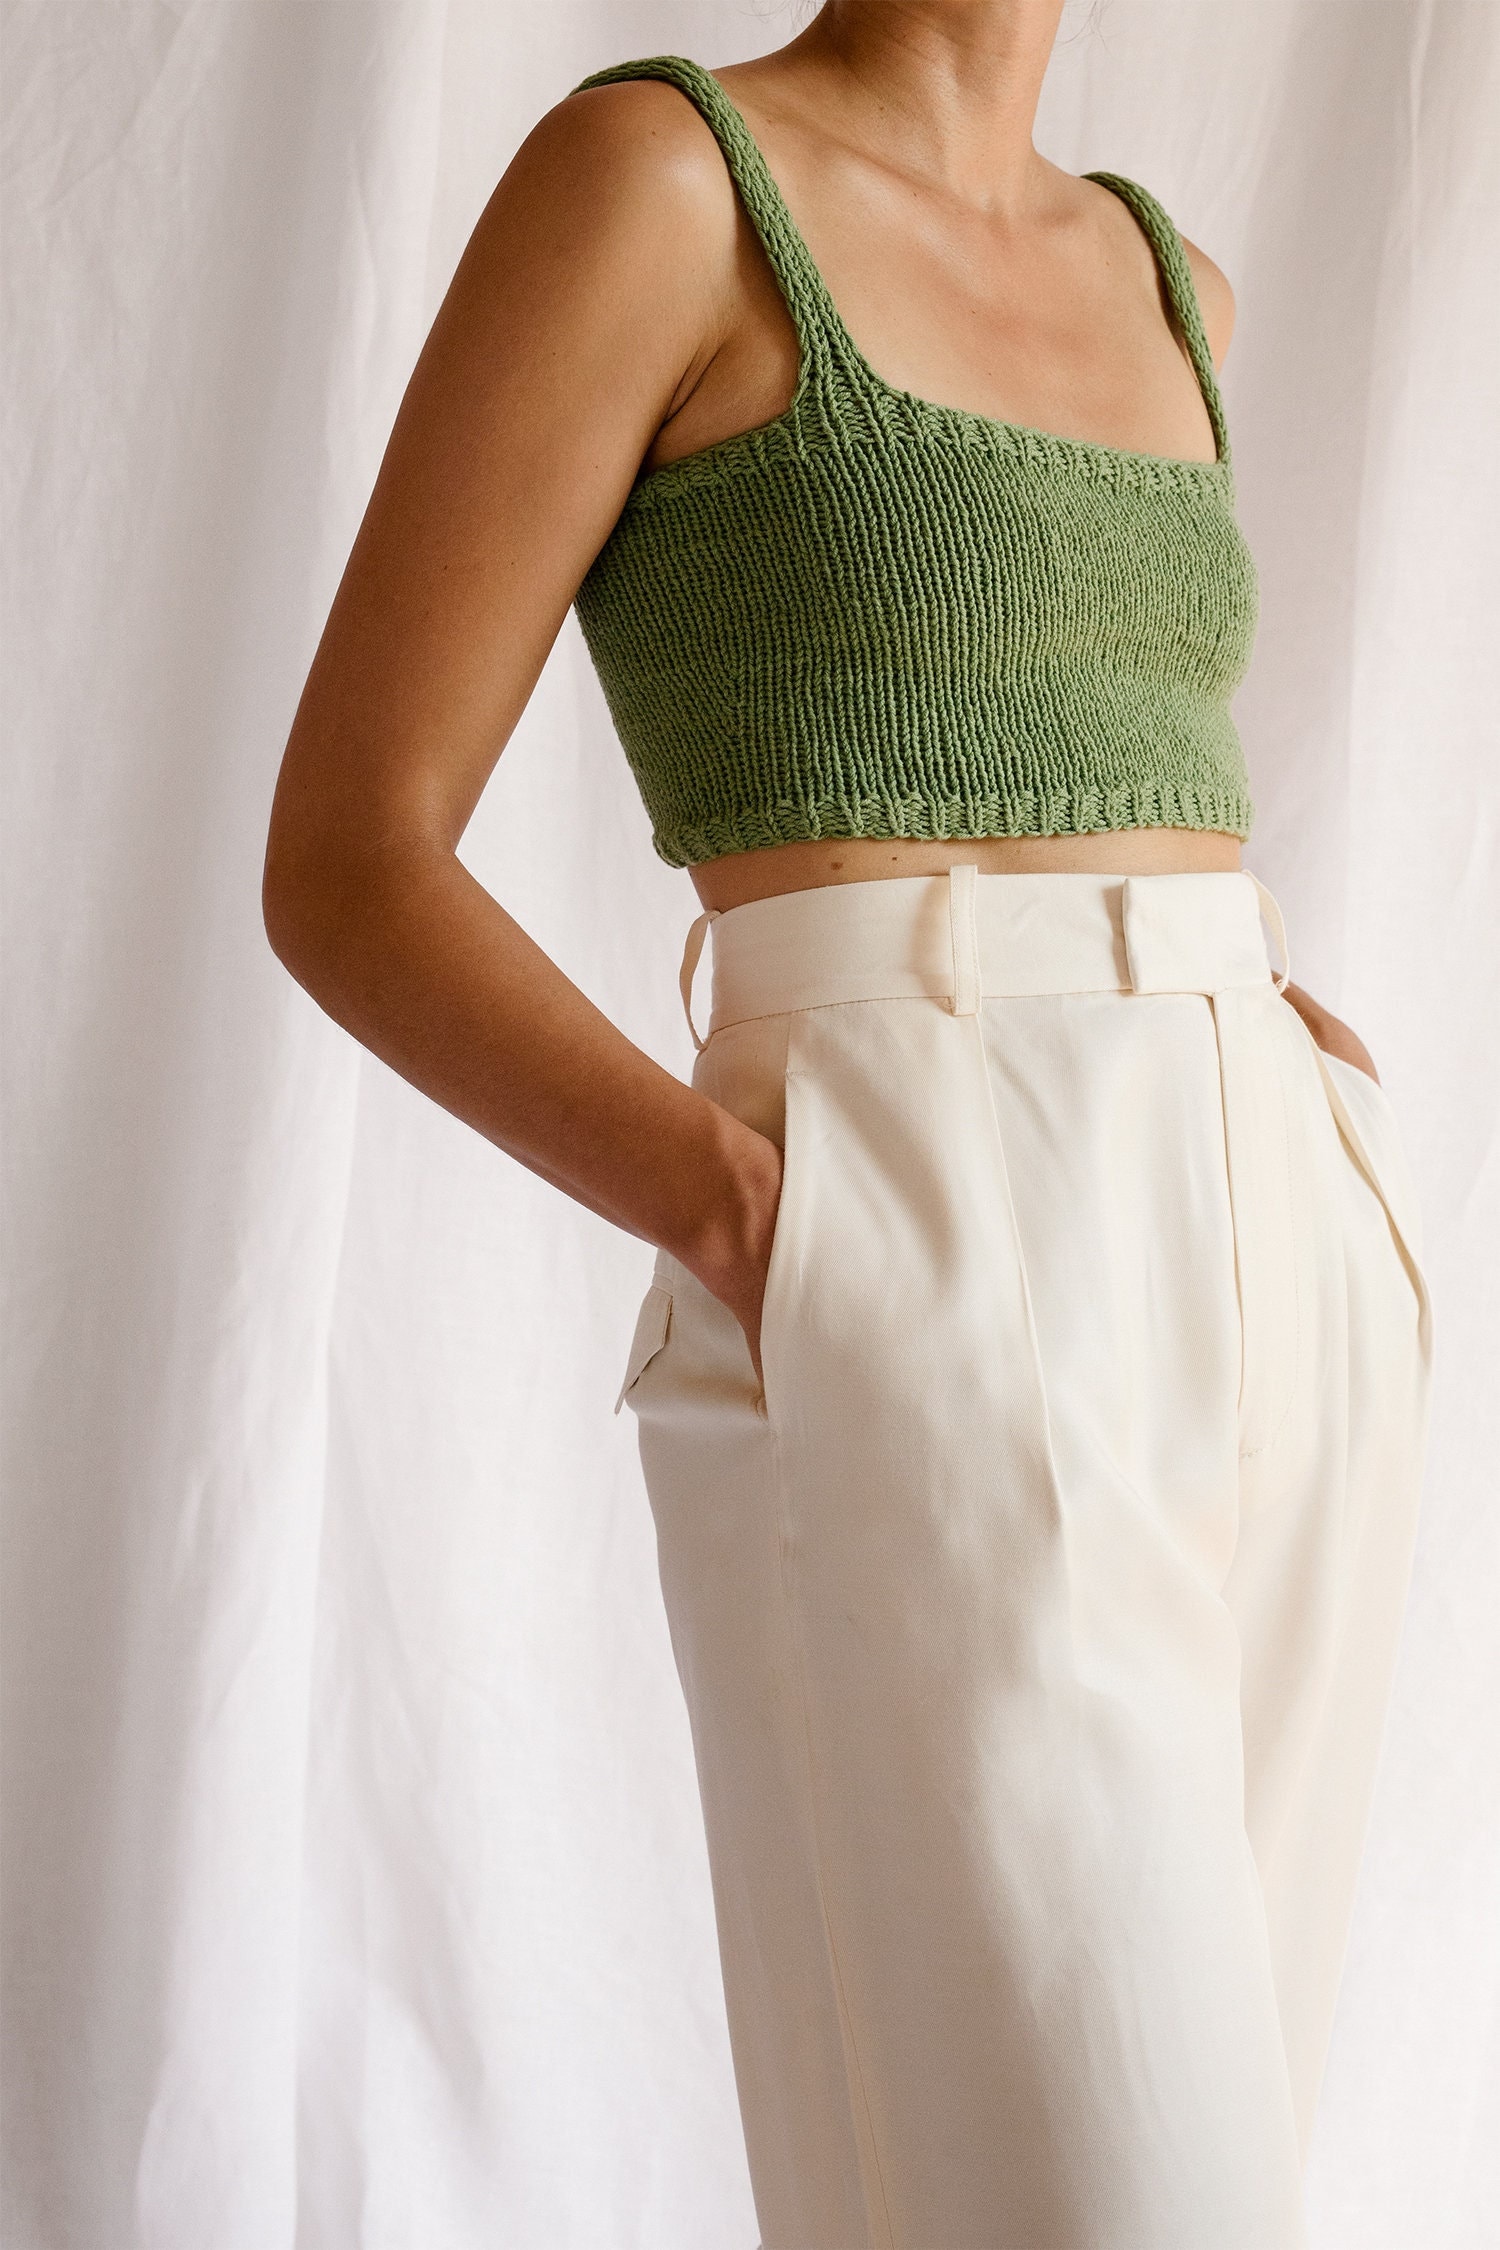 Square Neck Crop Top, Minimal Knit Top, Cropped Yoga Top, Hand Knit, Square  Neckline,sports Knit Bra, Fitted Cotton Bralette in Terra Cotta 